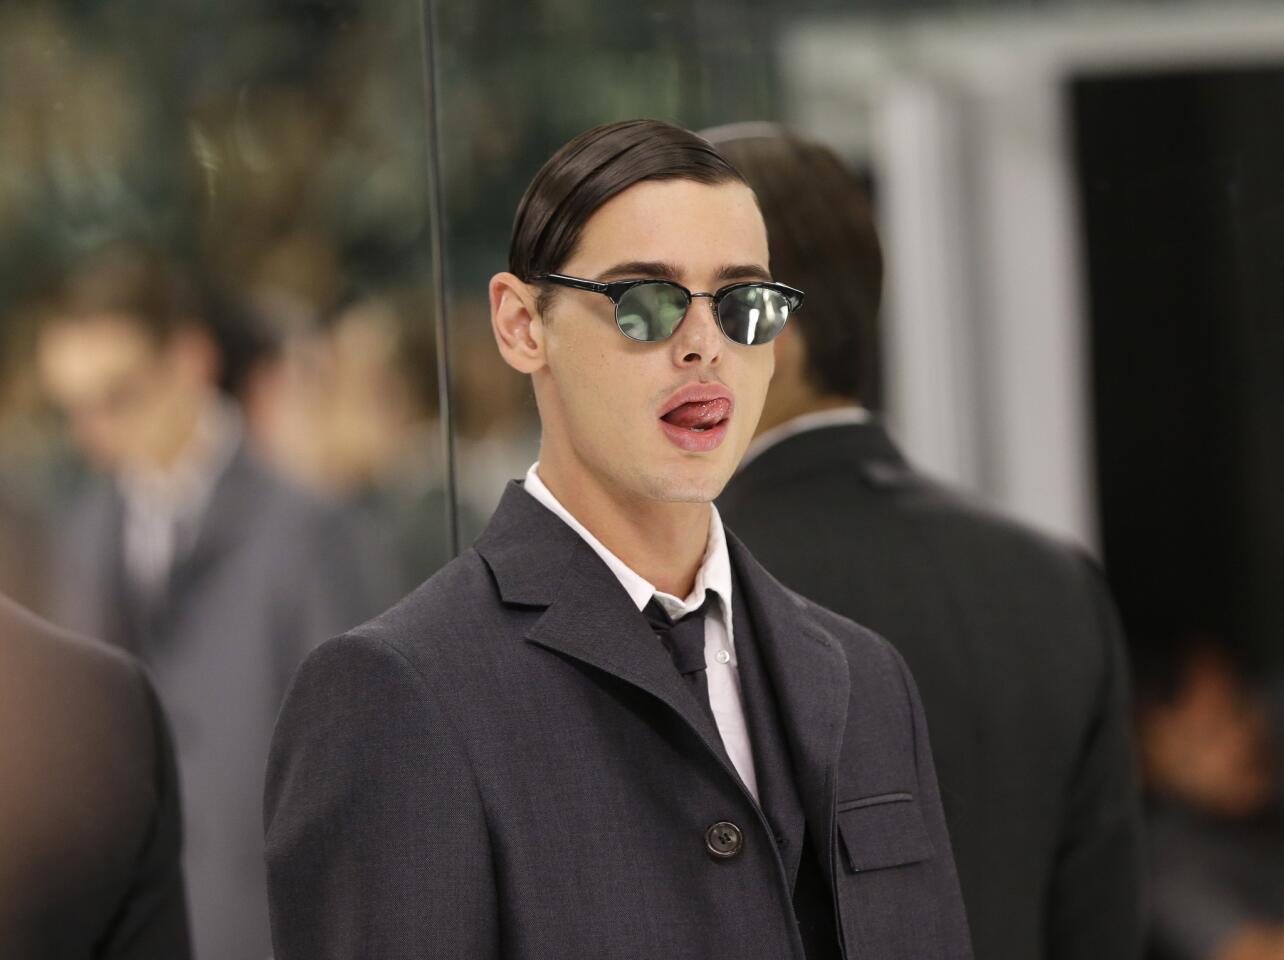 Thom Browne Spring/Summer 2016 collection